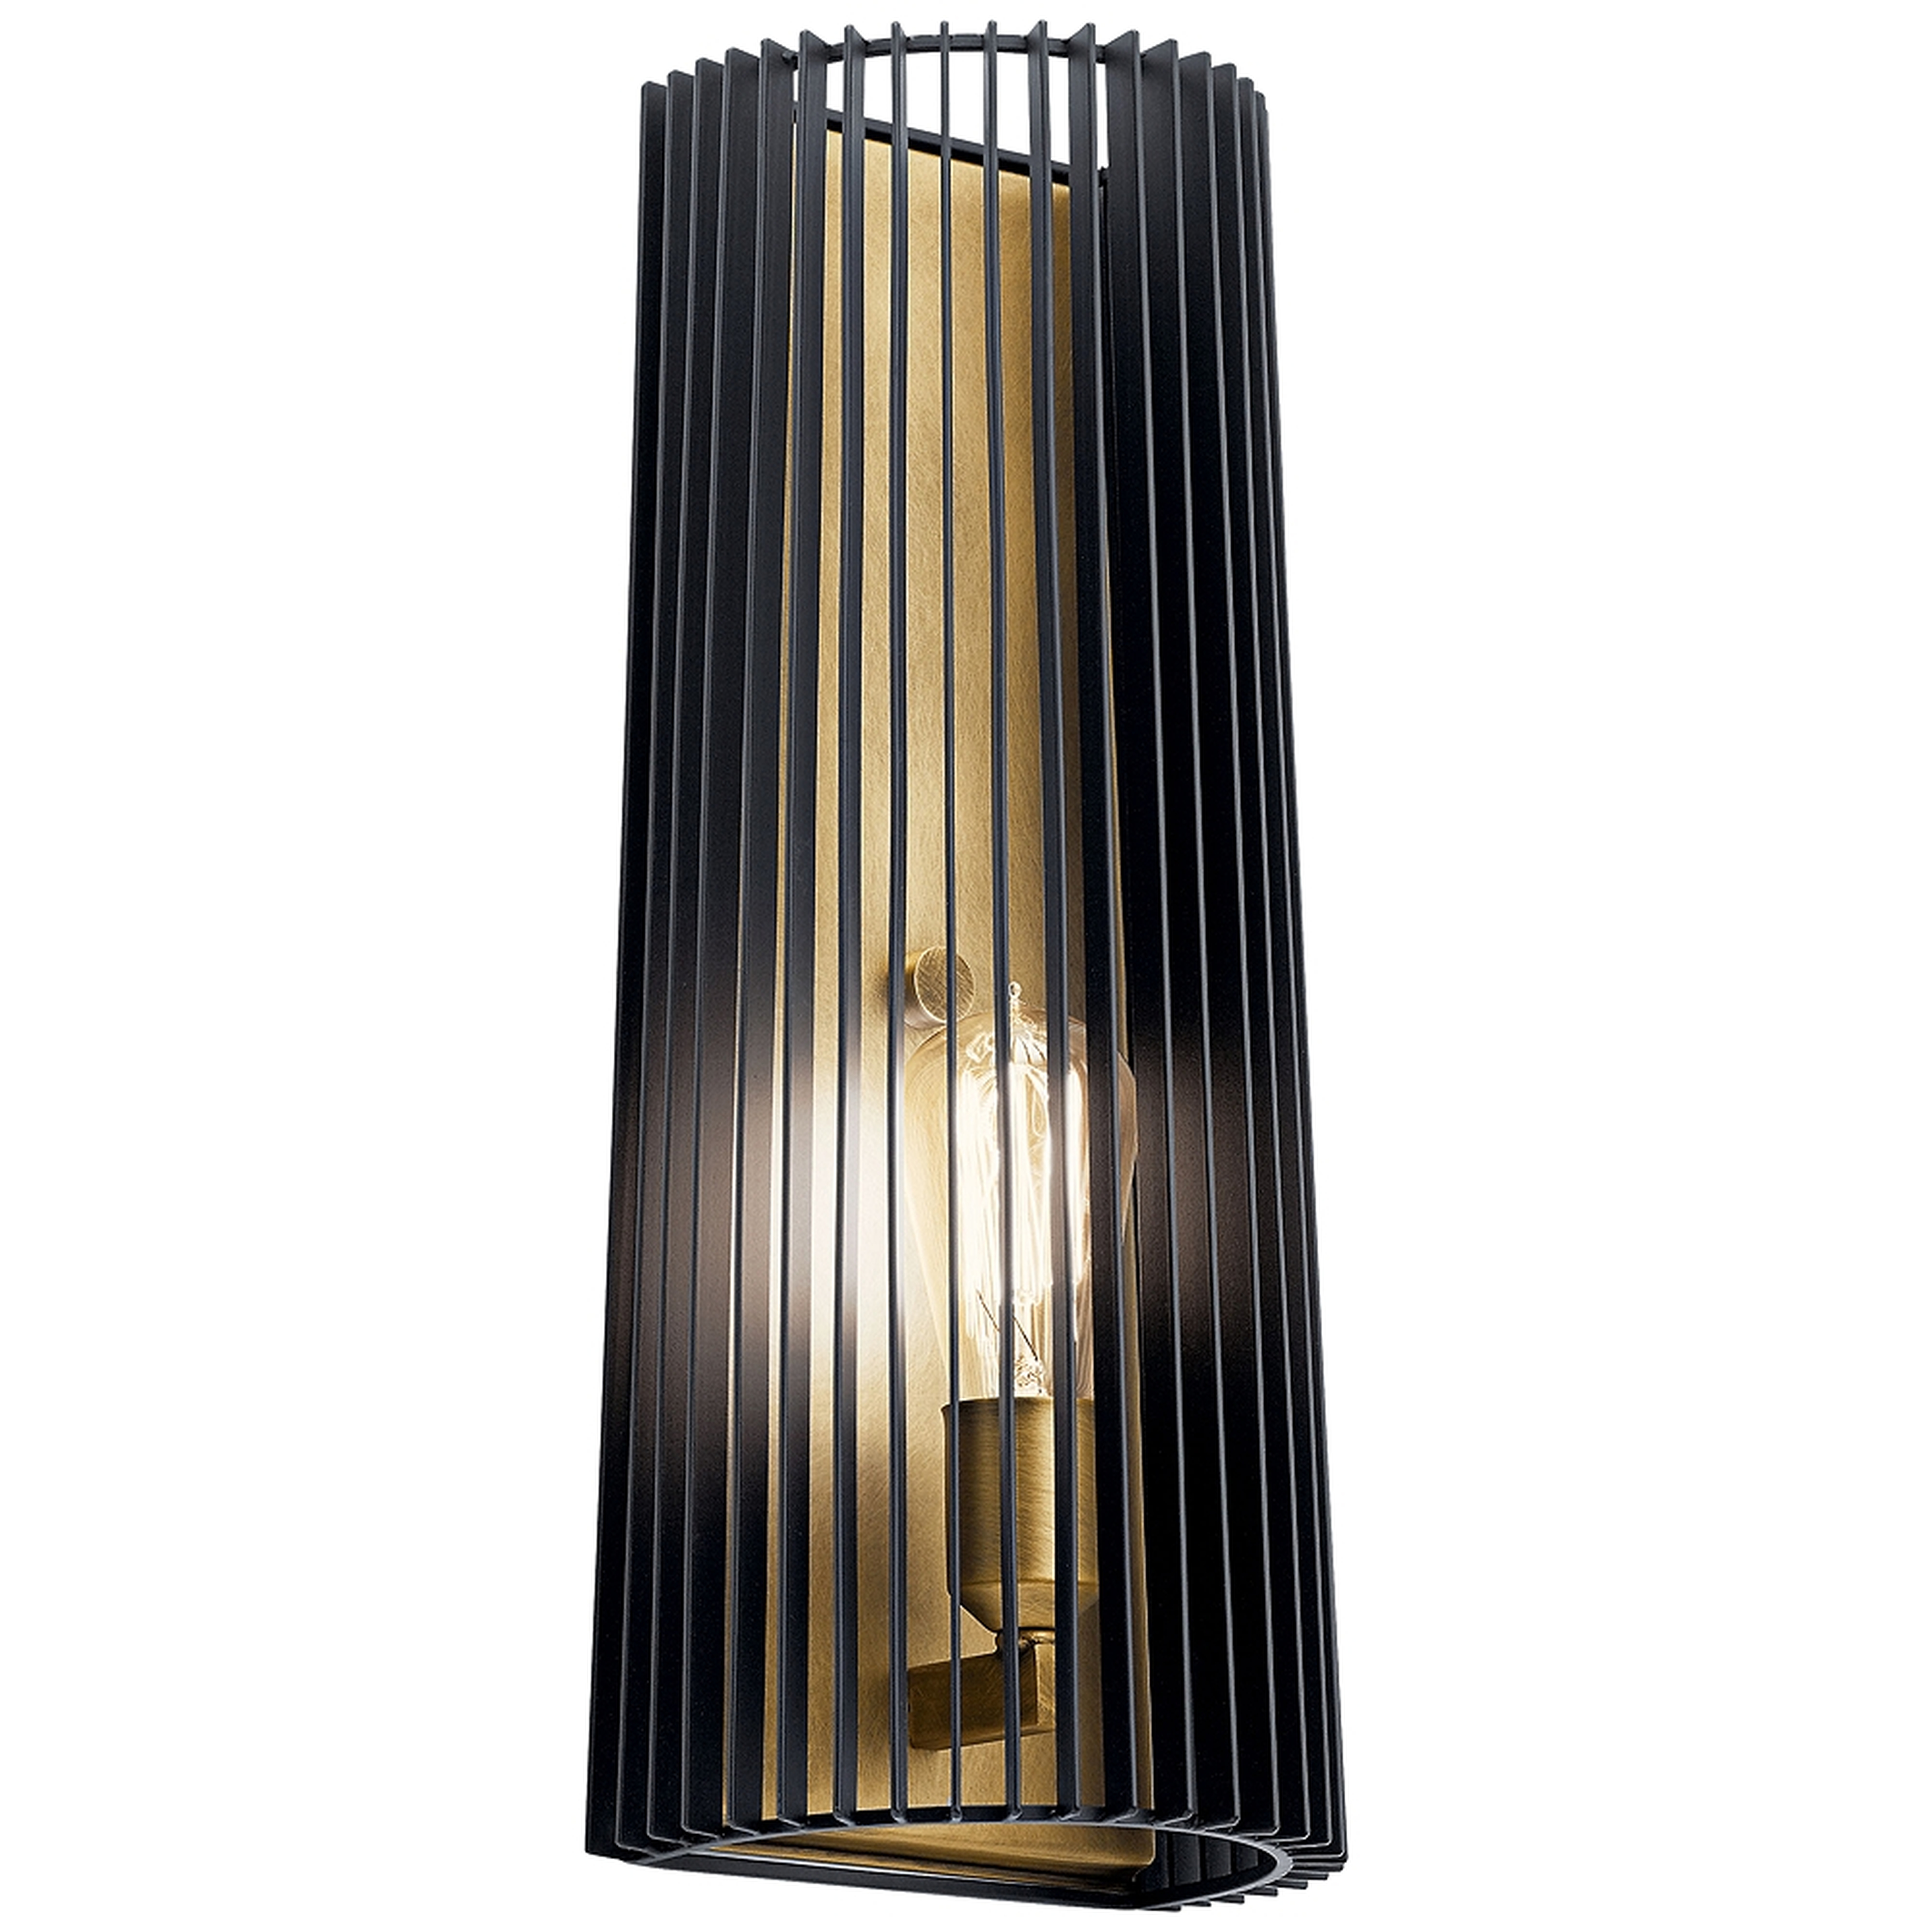 Kichler Linara 17" High Black and Natural Brass Wall Sconce - Style # 76E09 - Lamps Plus